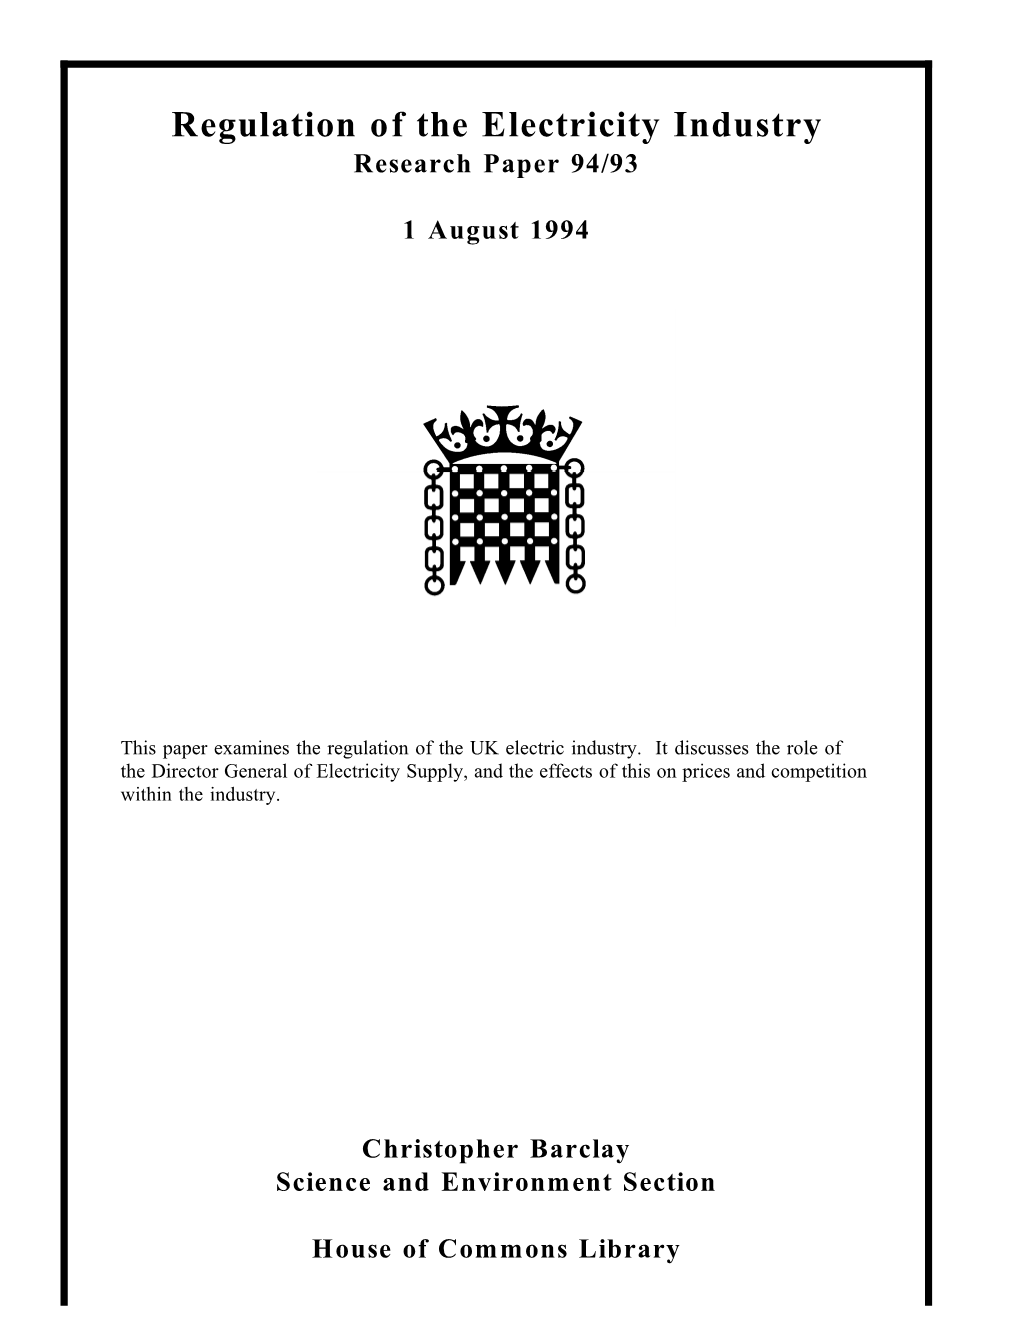 Regulation of the Electricity Industry Research Paper 94/93